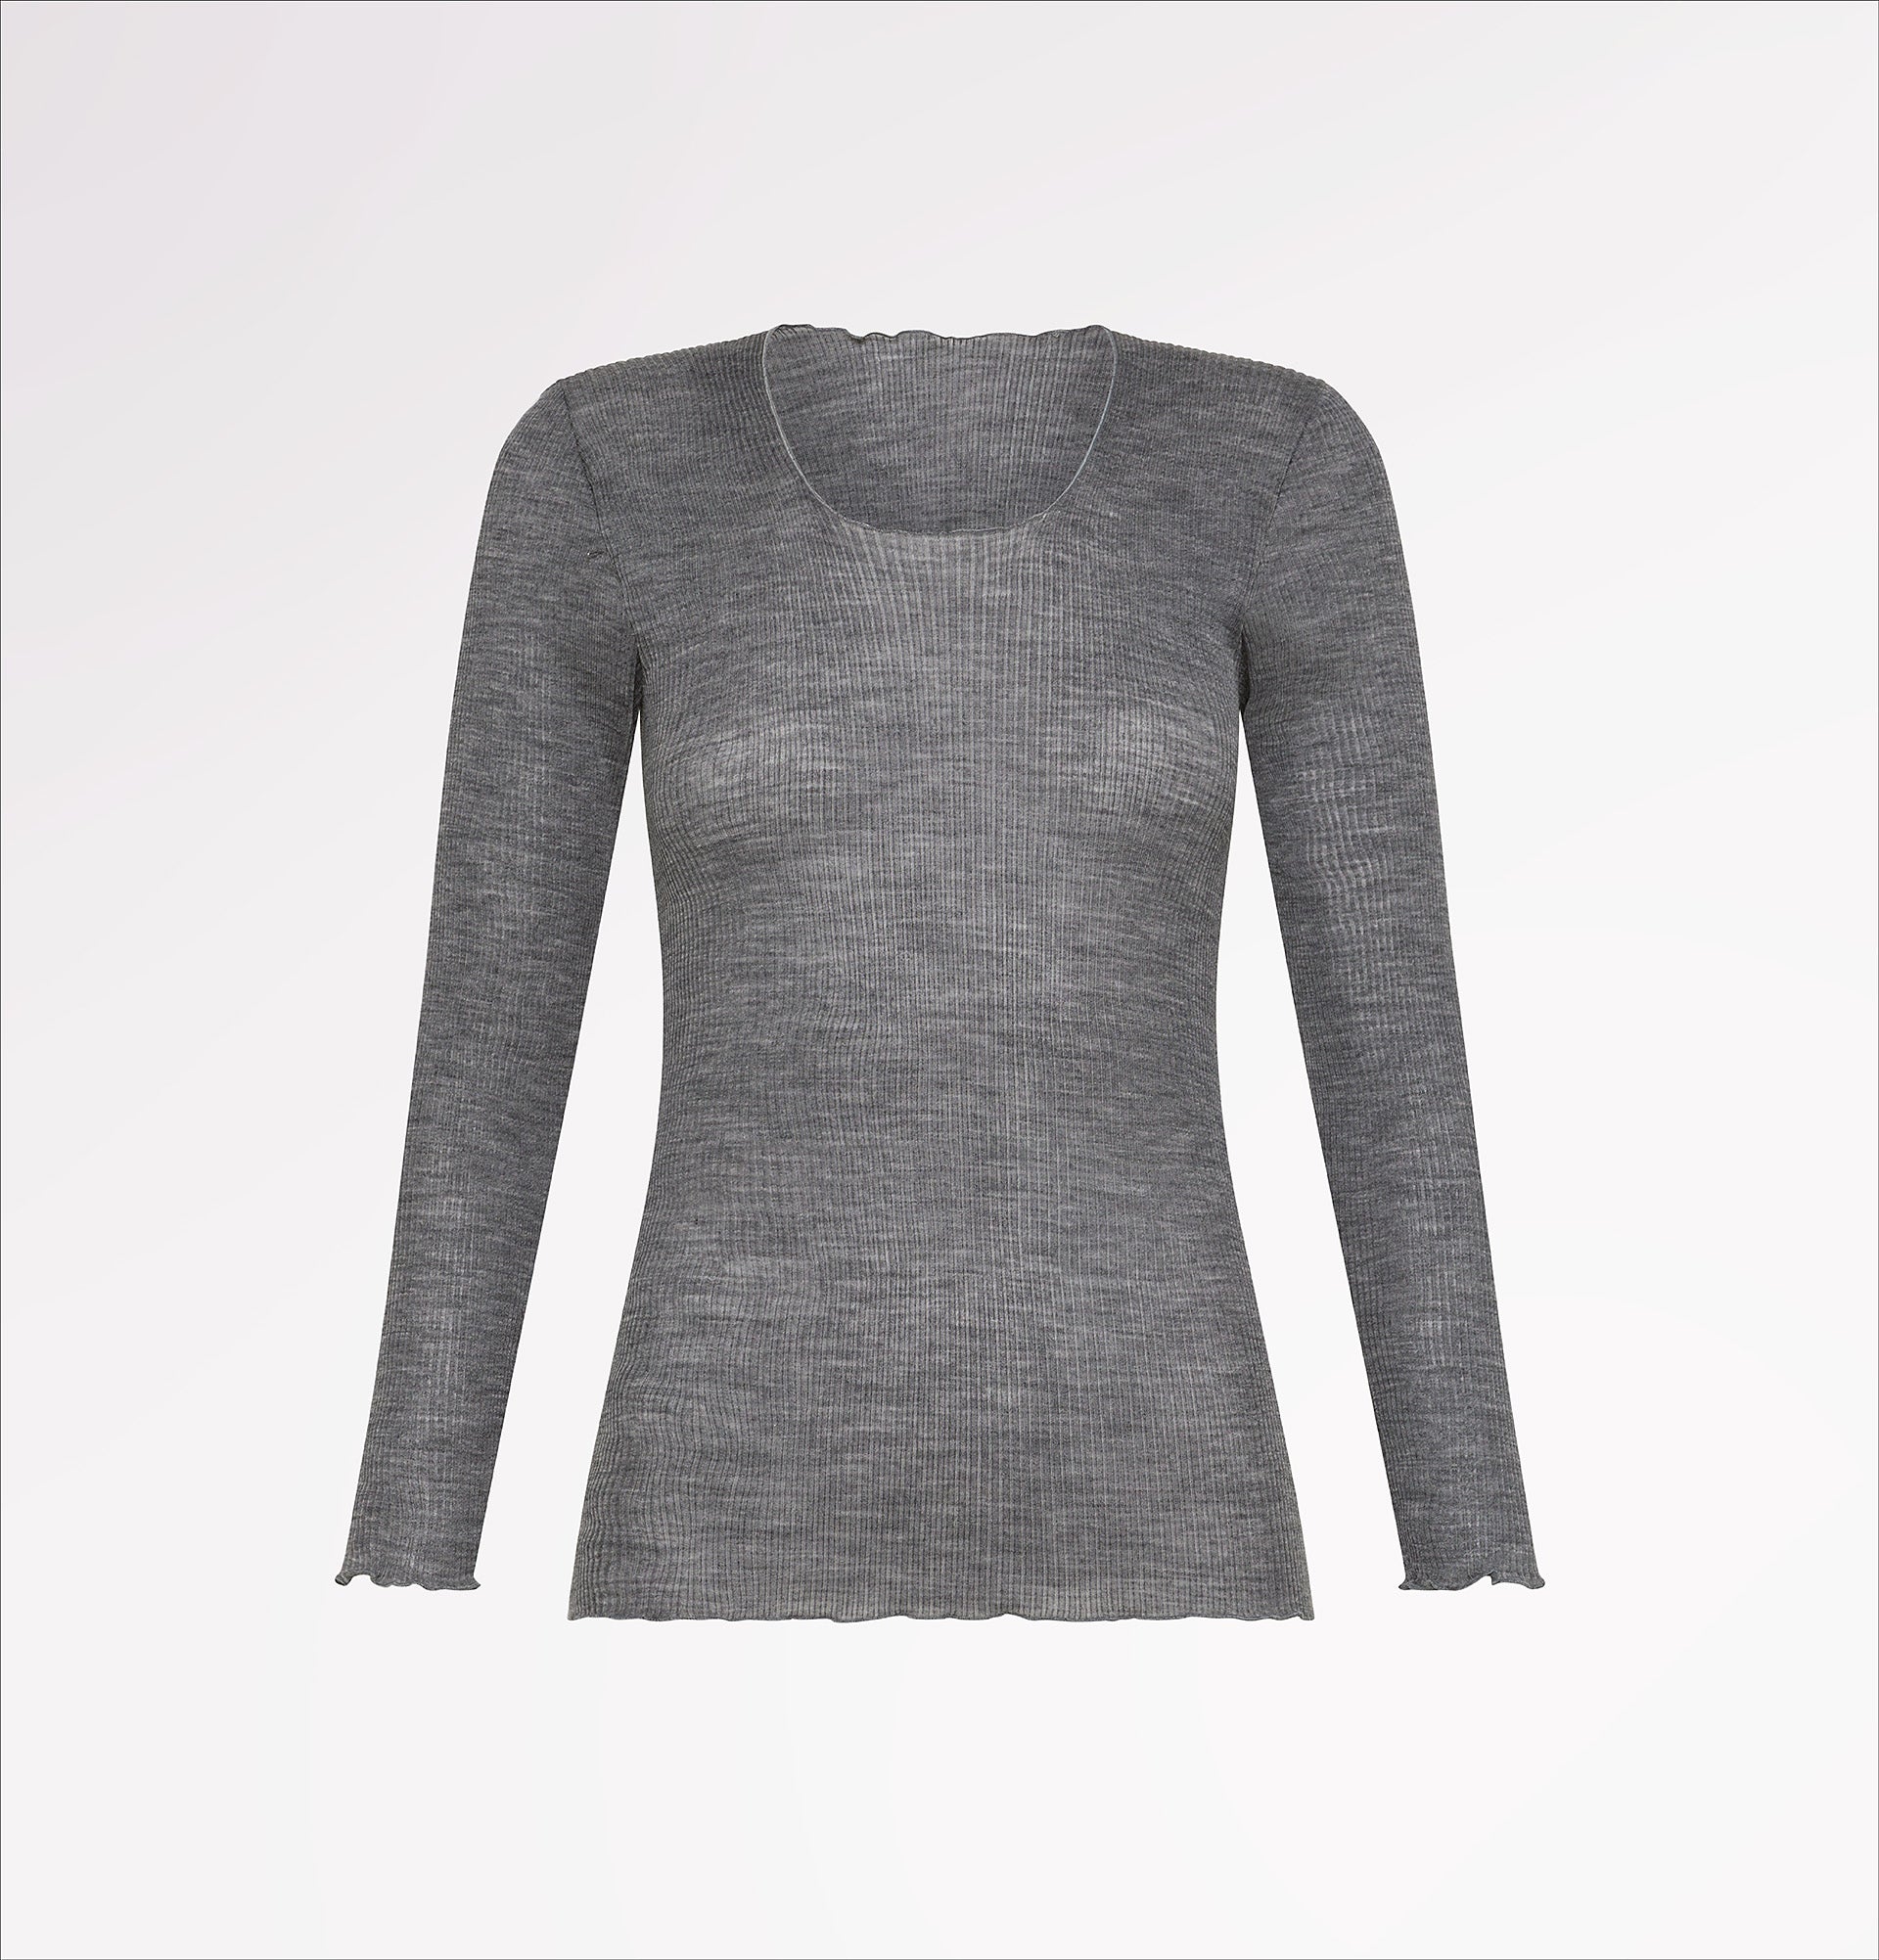 Long-sleeved wool crew-neck sweater